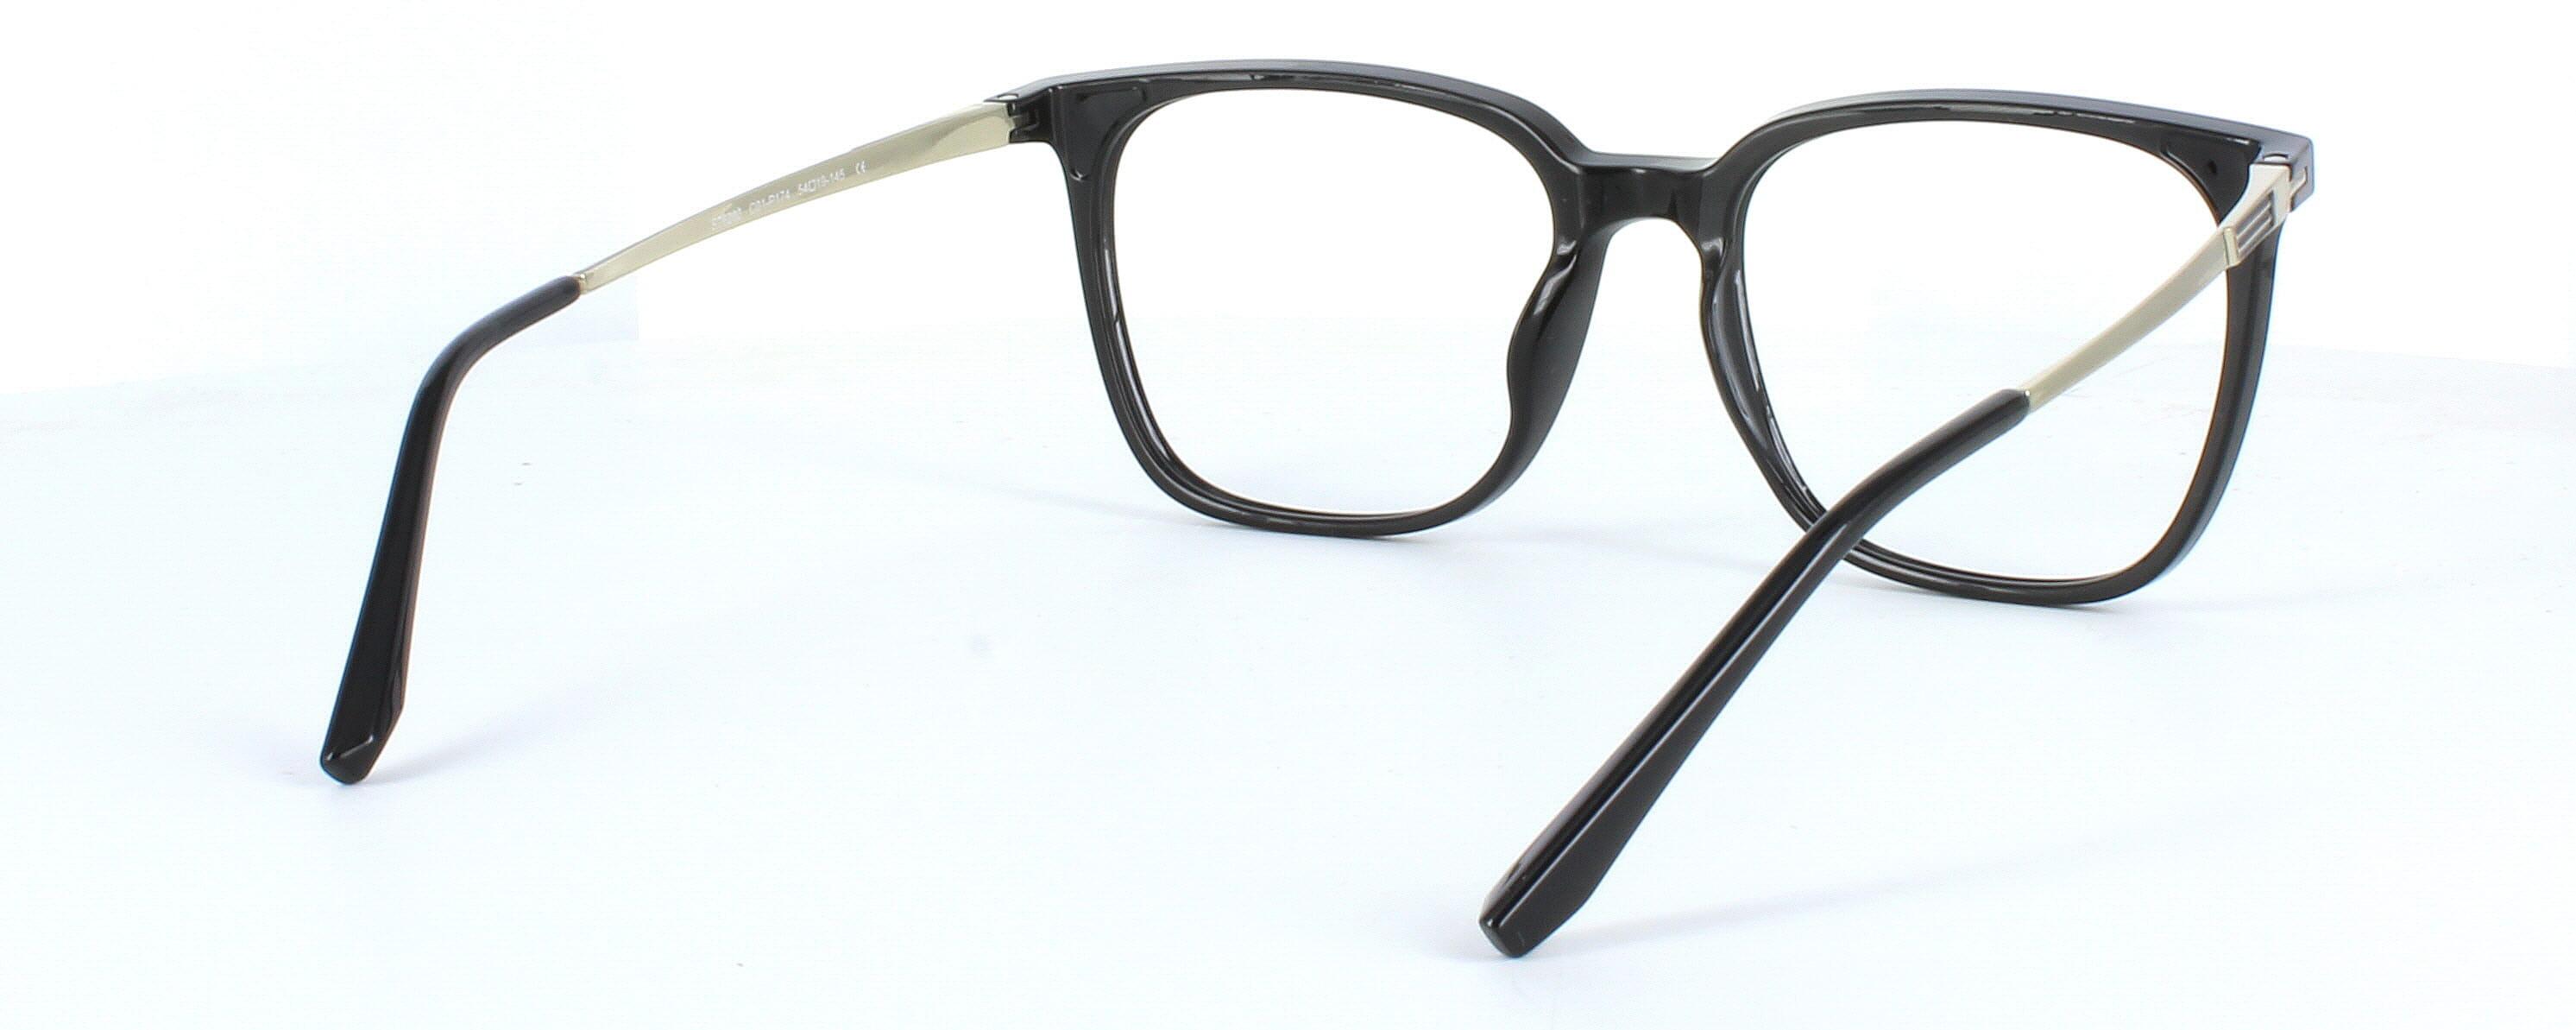 Edward Scotts ST6202 - Shiny black - Gent's acetate frame with square shaped lenses with silver titanium arms - image view 5